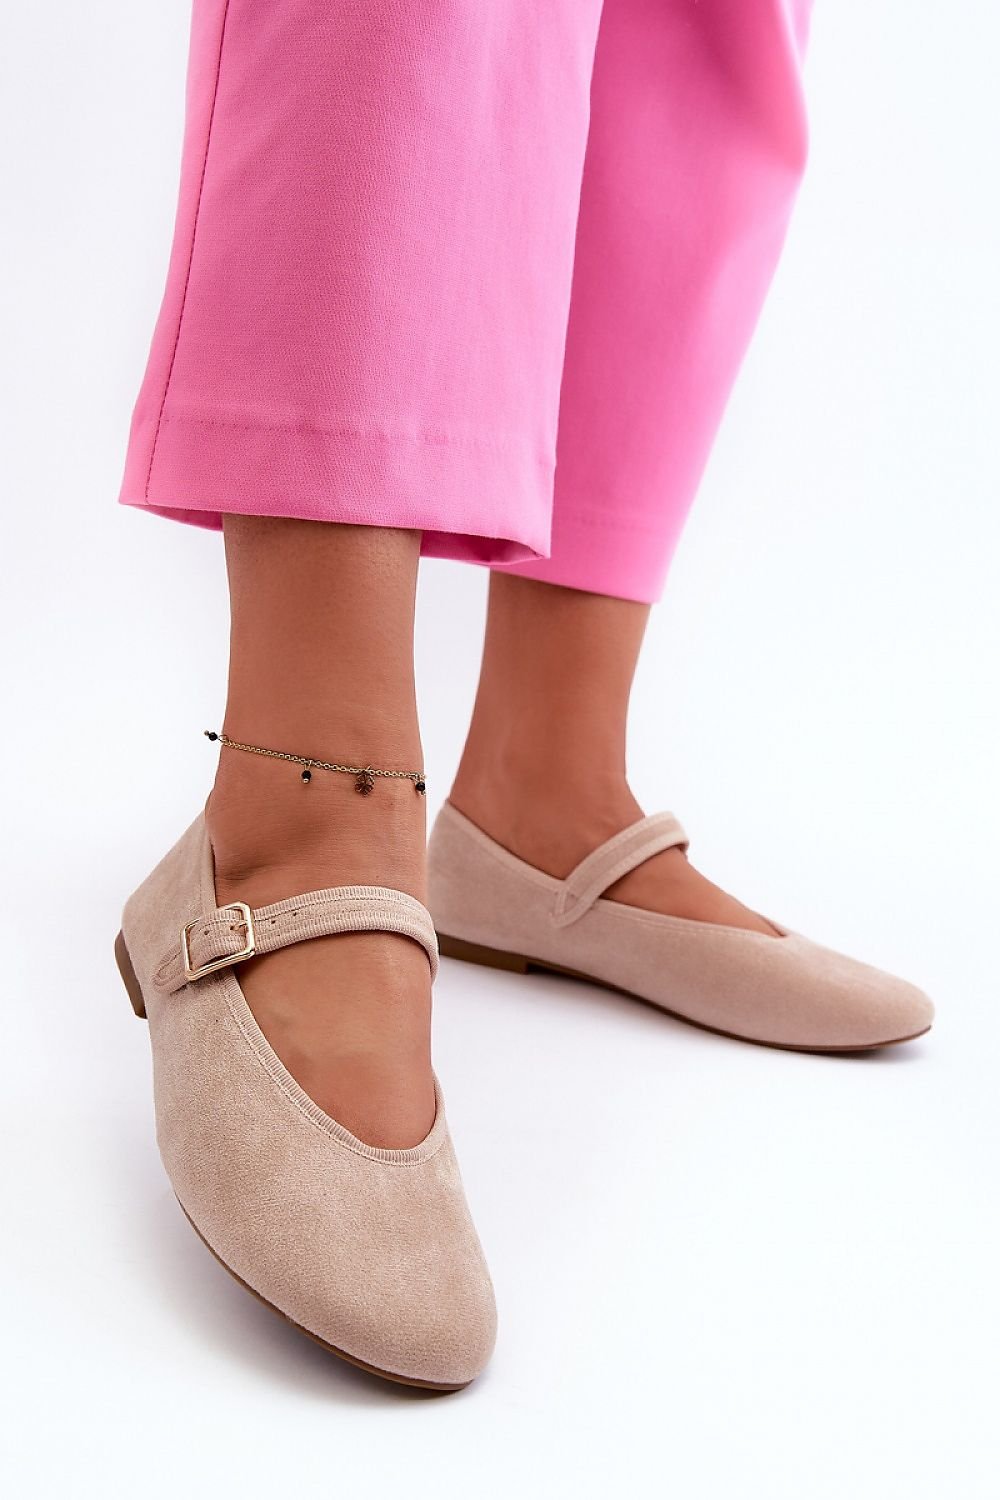 Ballet flats model 198696 Step in style